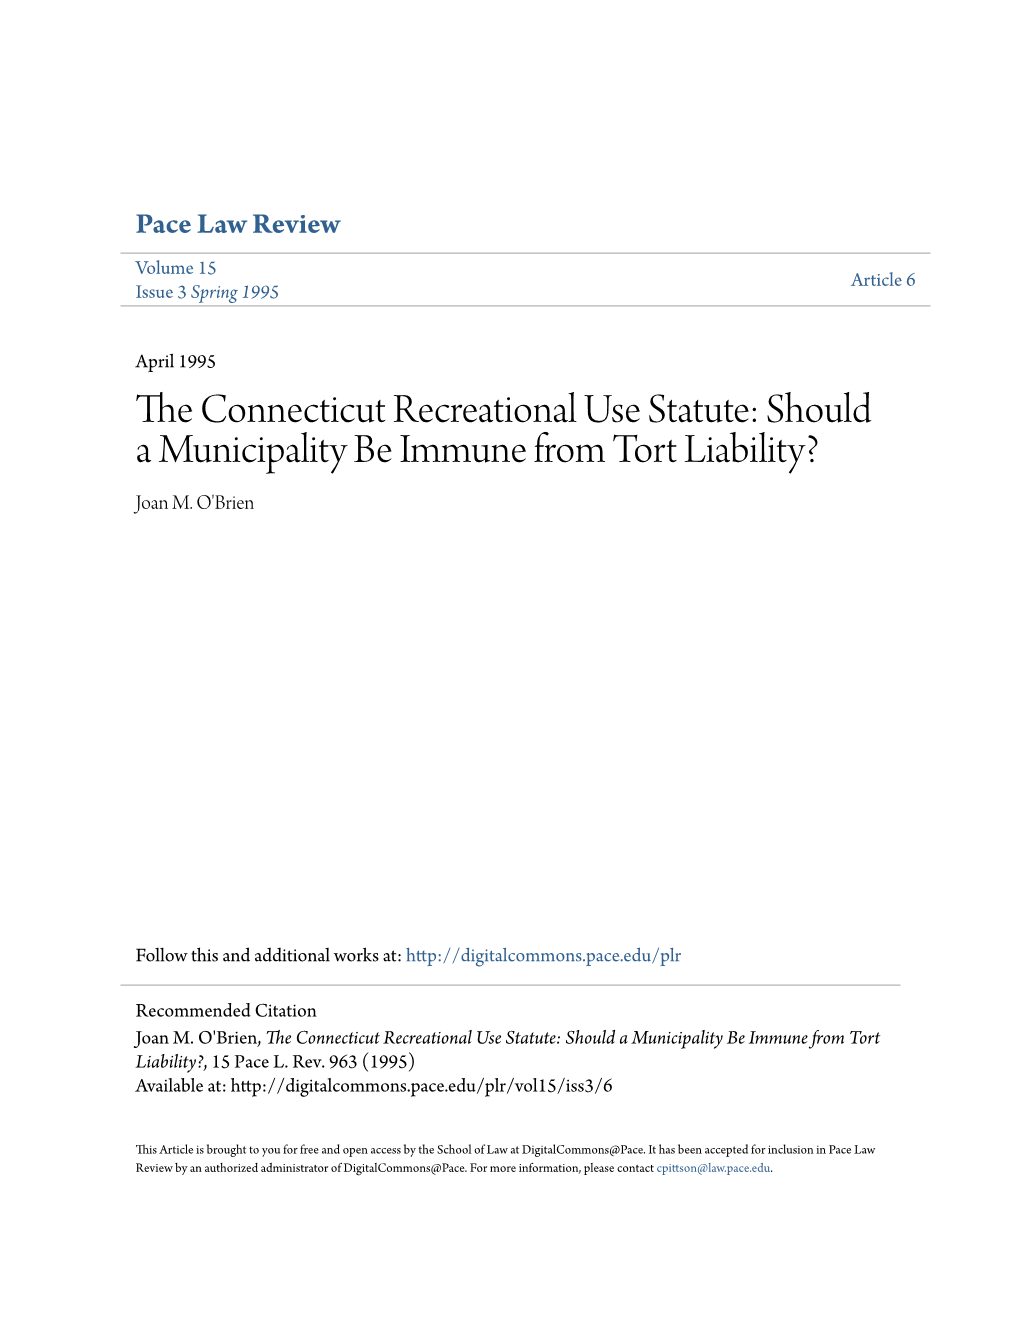 The Connecticut Recreational Use Statute: Should a Municipality Be Immune from Tort Liability?, 15 Pace L